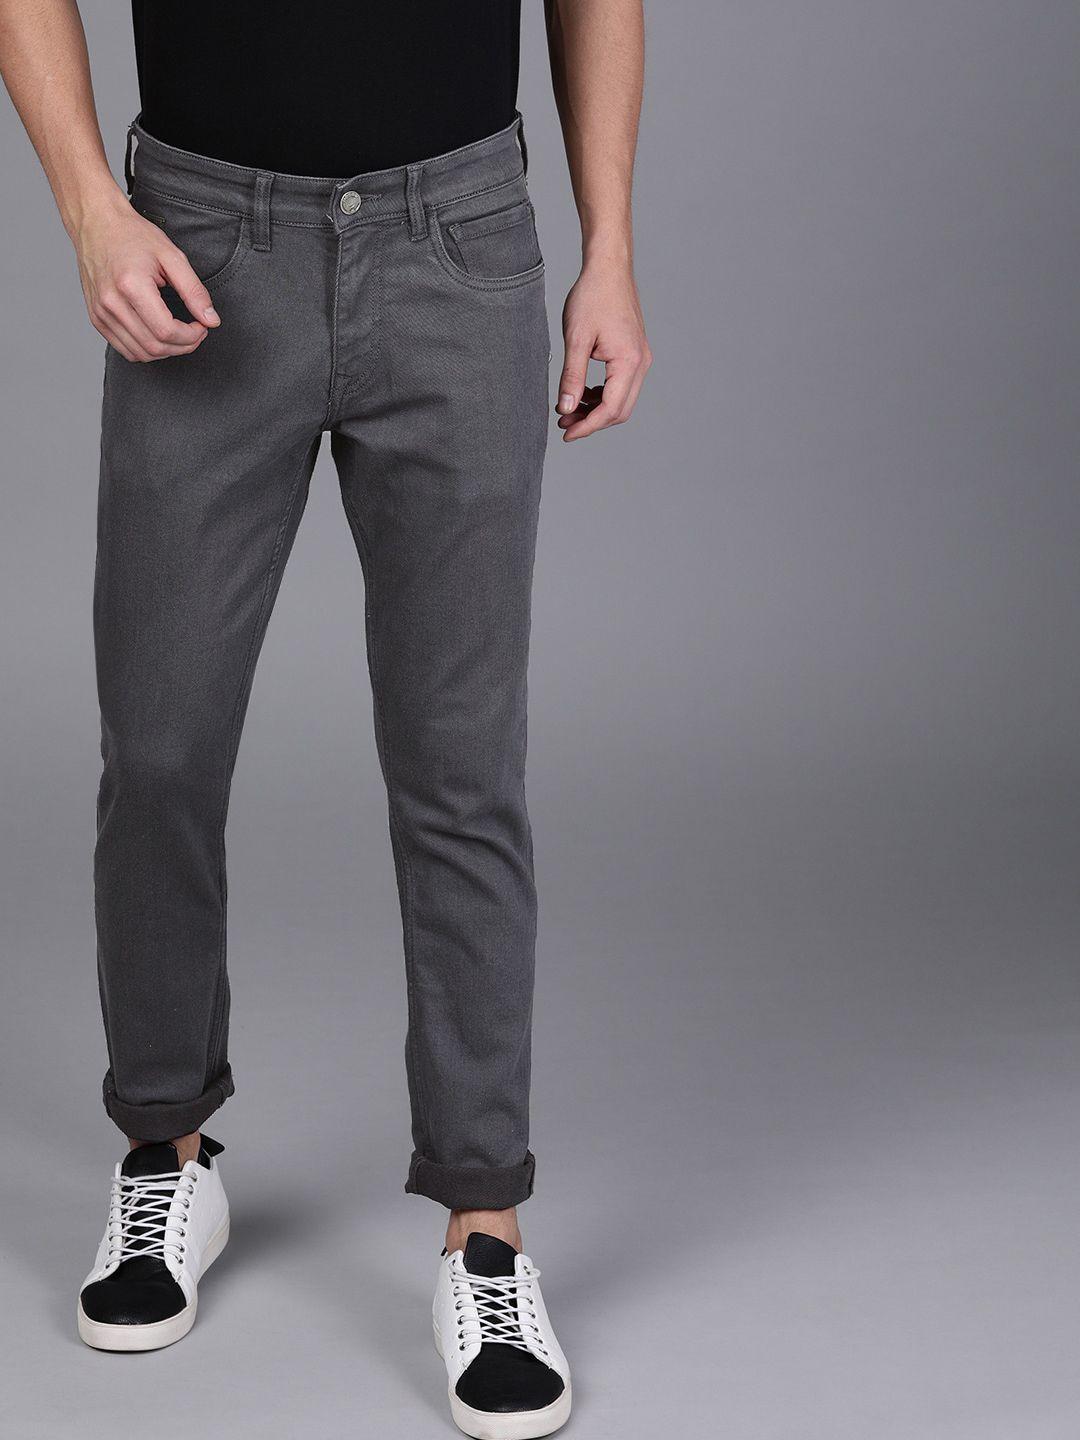 wrogn men grey slim fit mid-rise clean look stretchable jeans